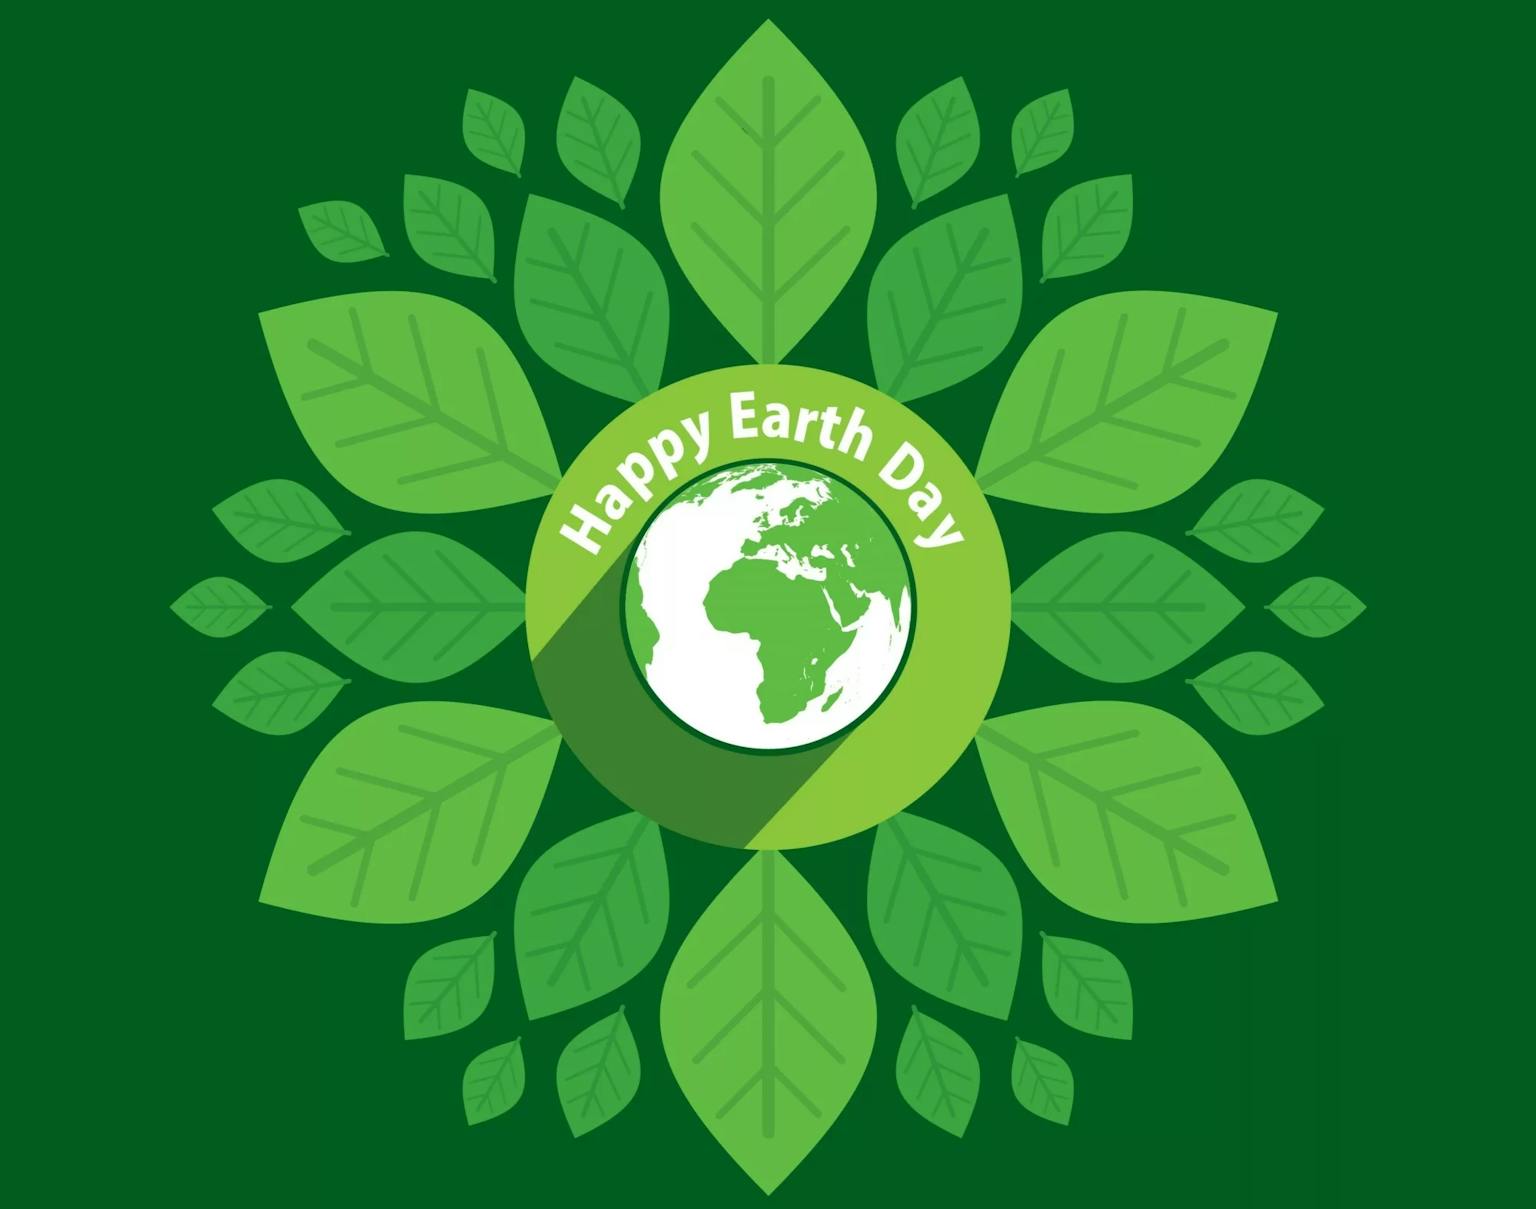 Gelson’s supports earth sustainability